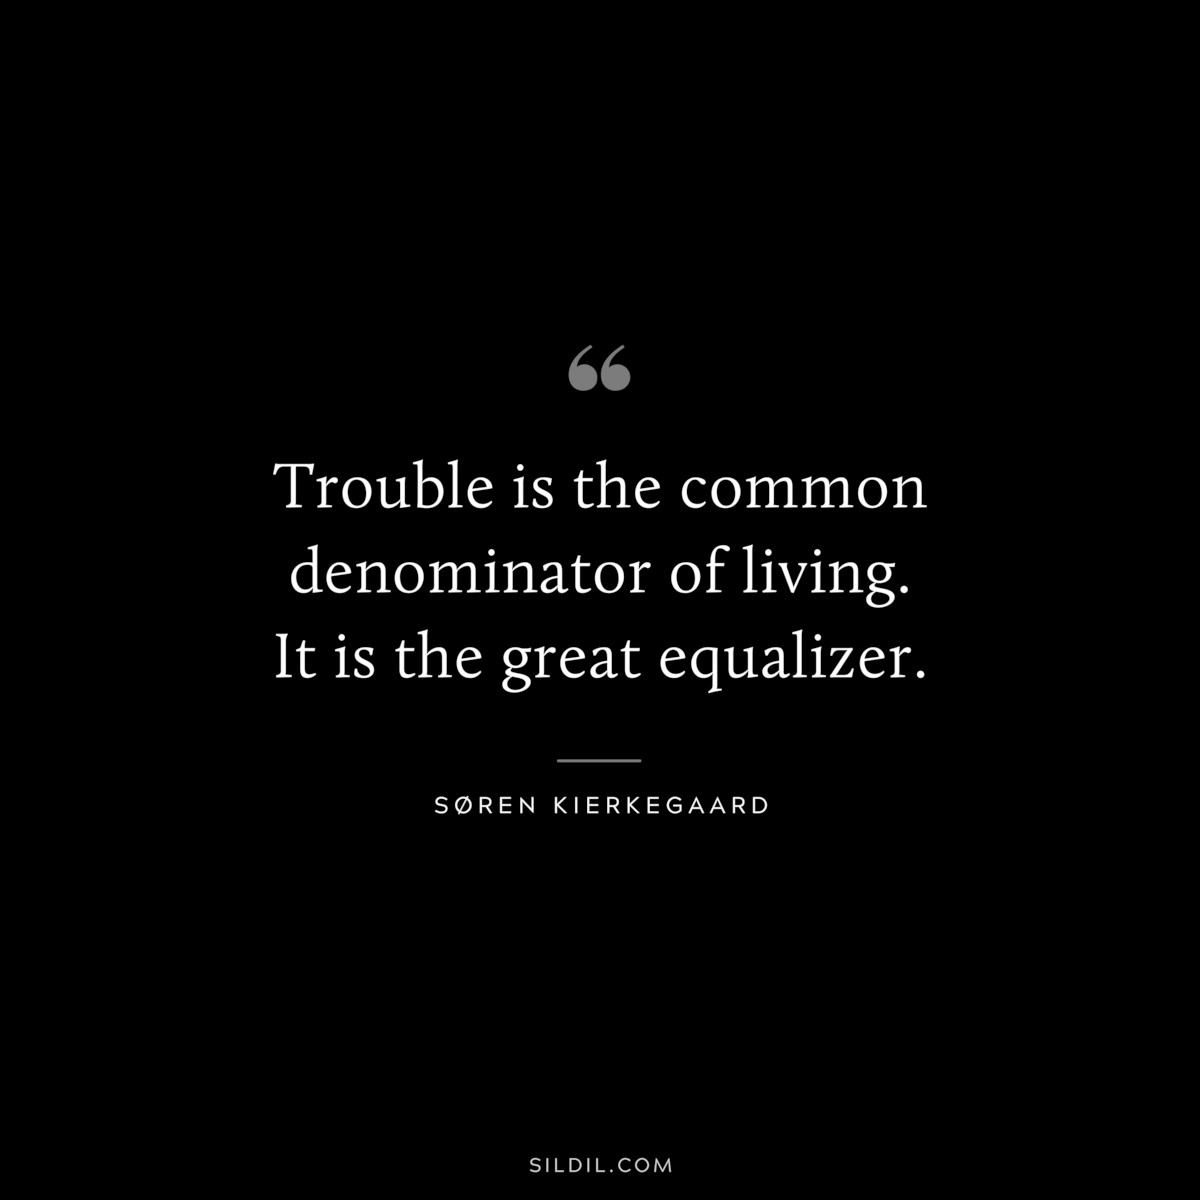 Trouble is the common denominator of living. It is the great equalizer. ― Søren Kierkegaard